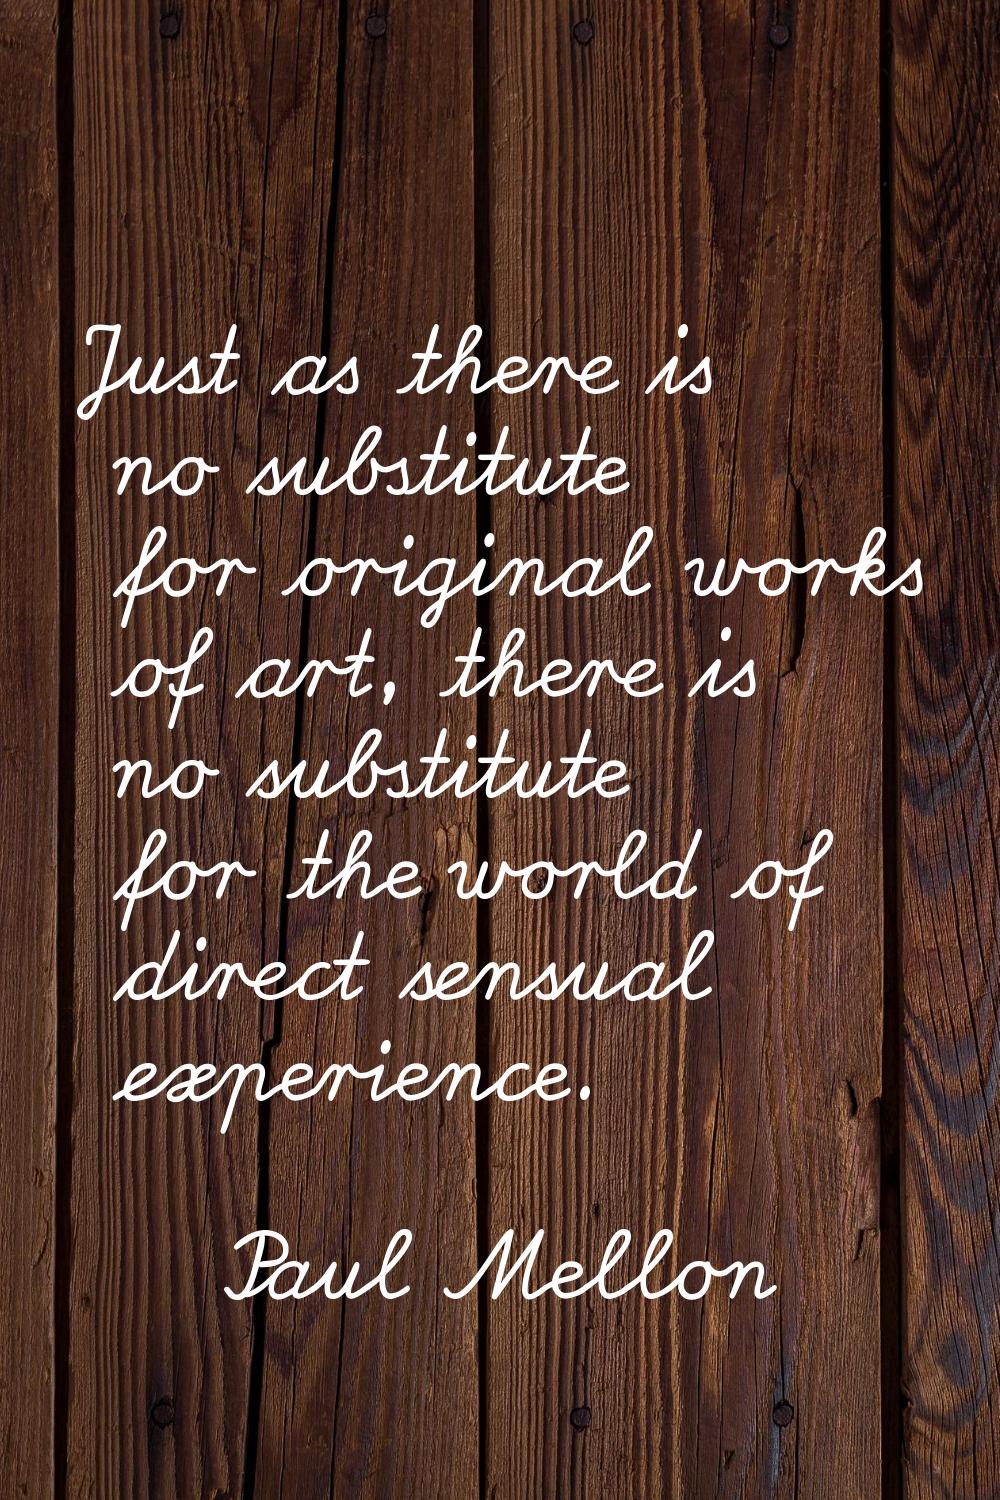 Just as there is no substitute for original works of art, there is no substitute for the world of d